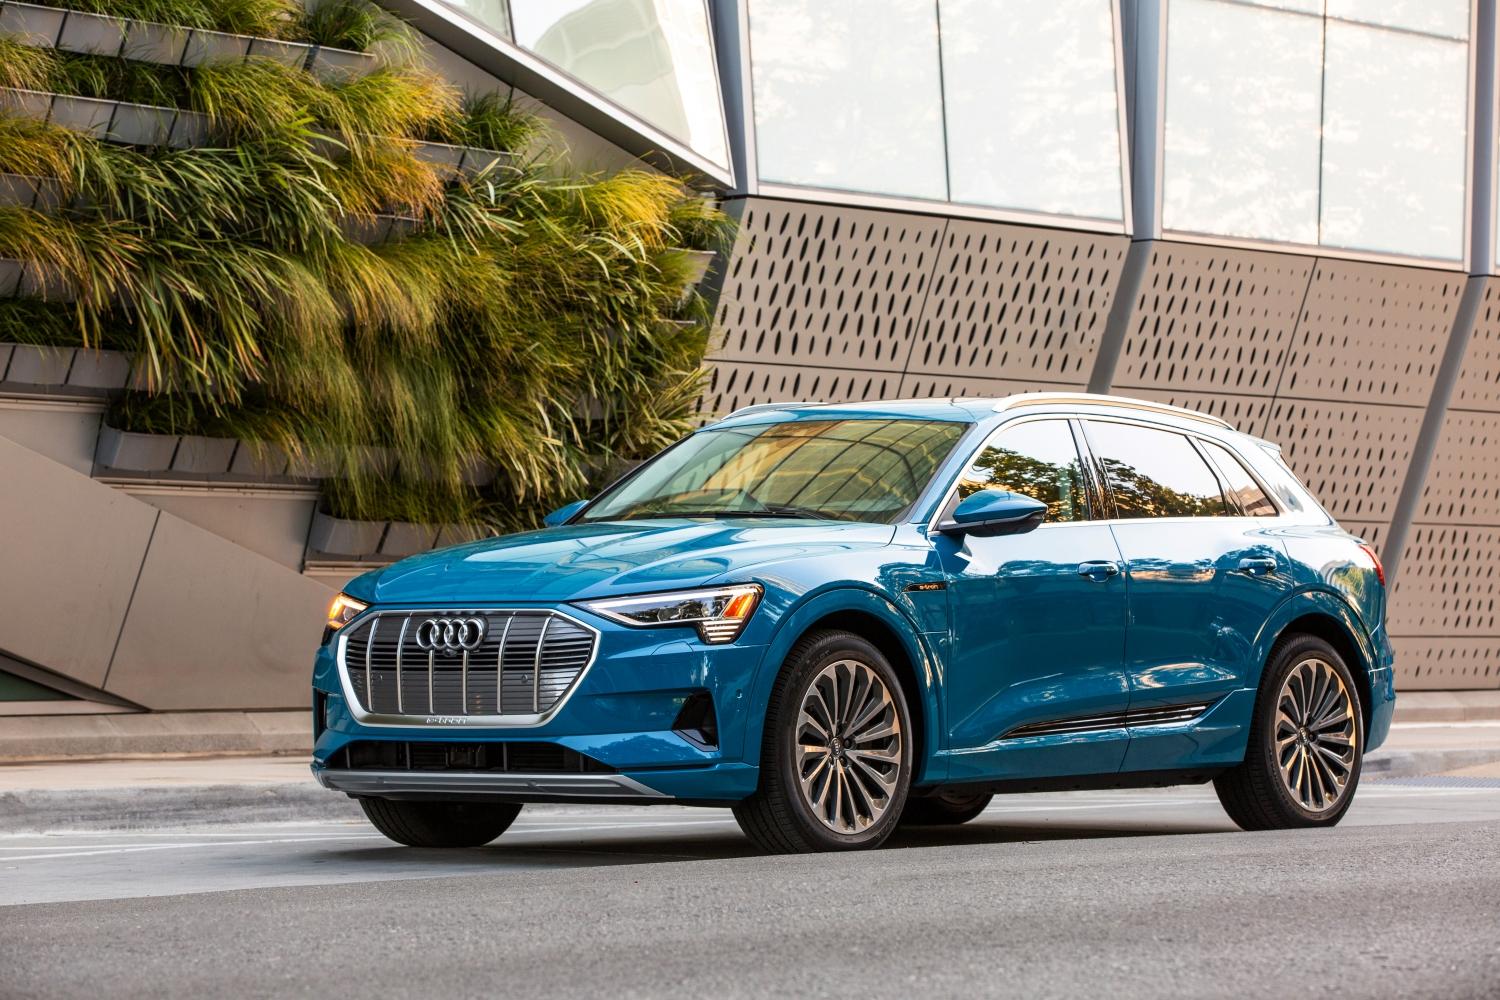 The Audi e-tron will be a small part of the company’s all-electric fleet.